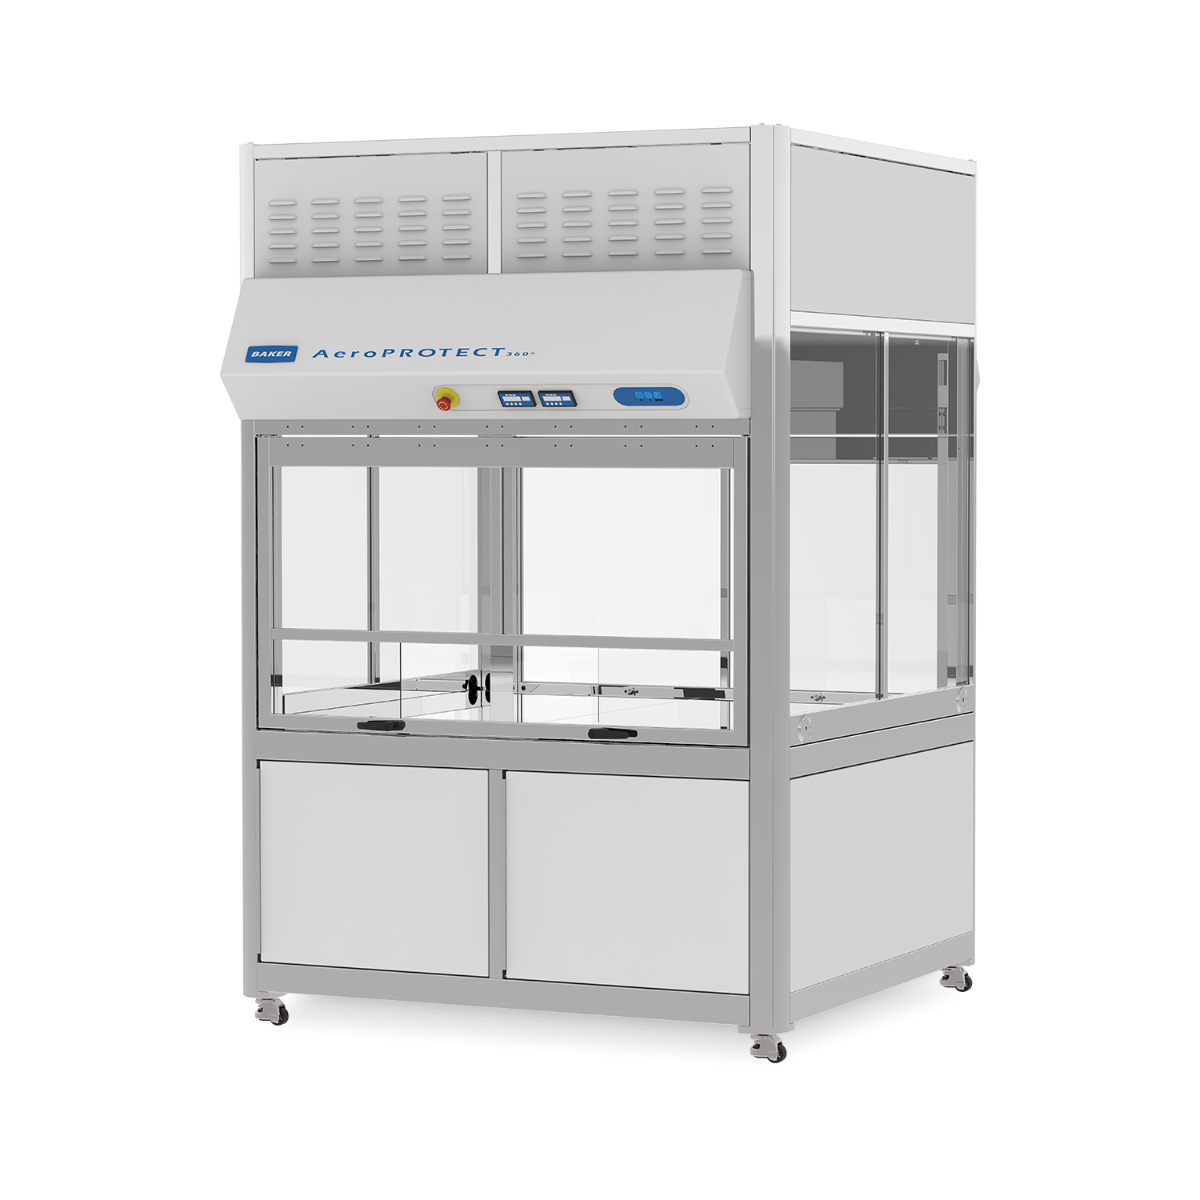 AeroPROTECT 360° Aseptic Containment Enclosure